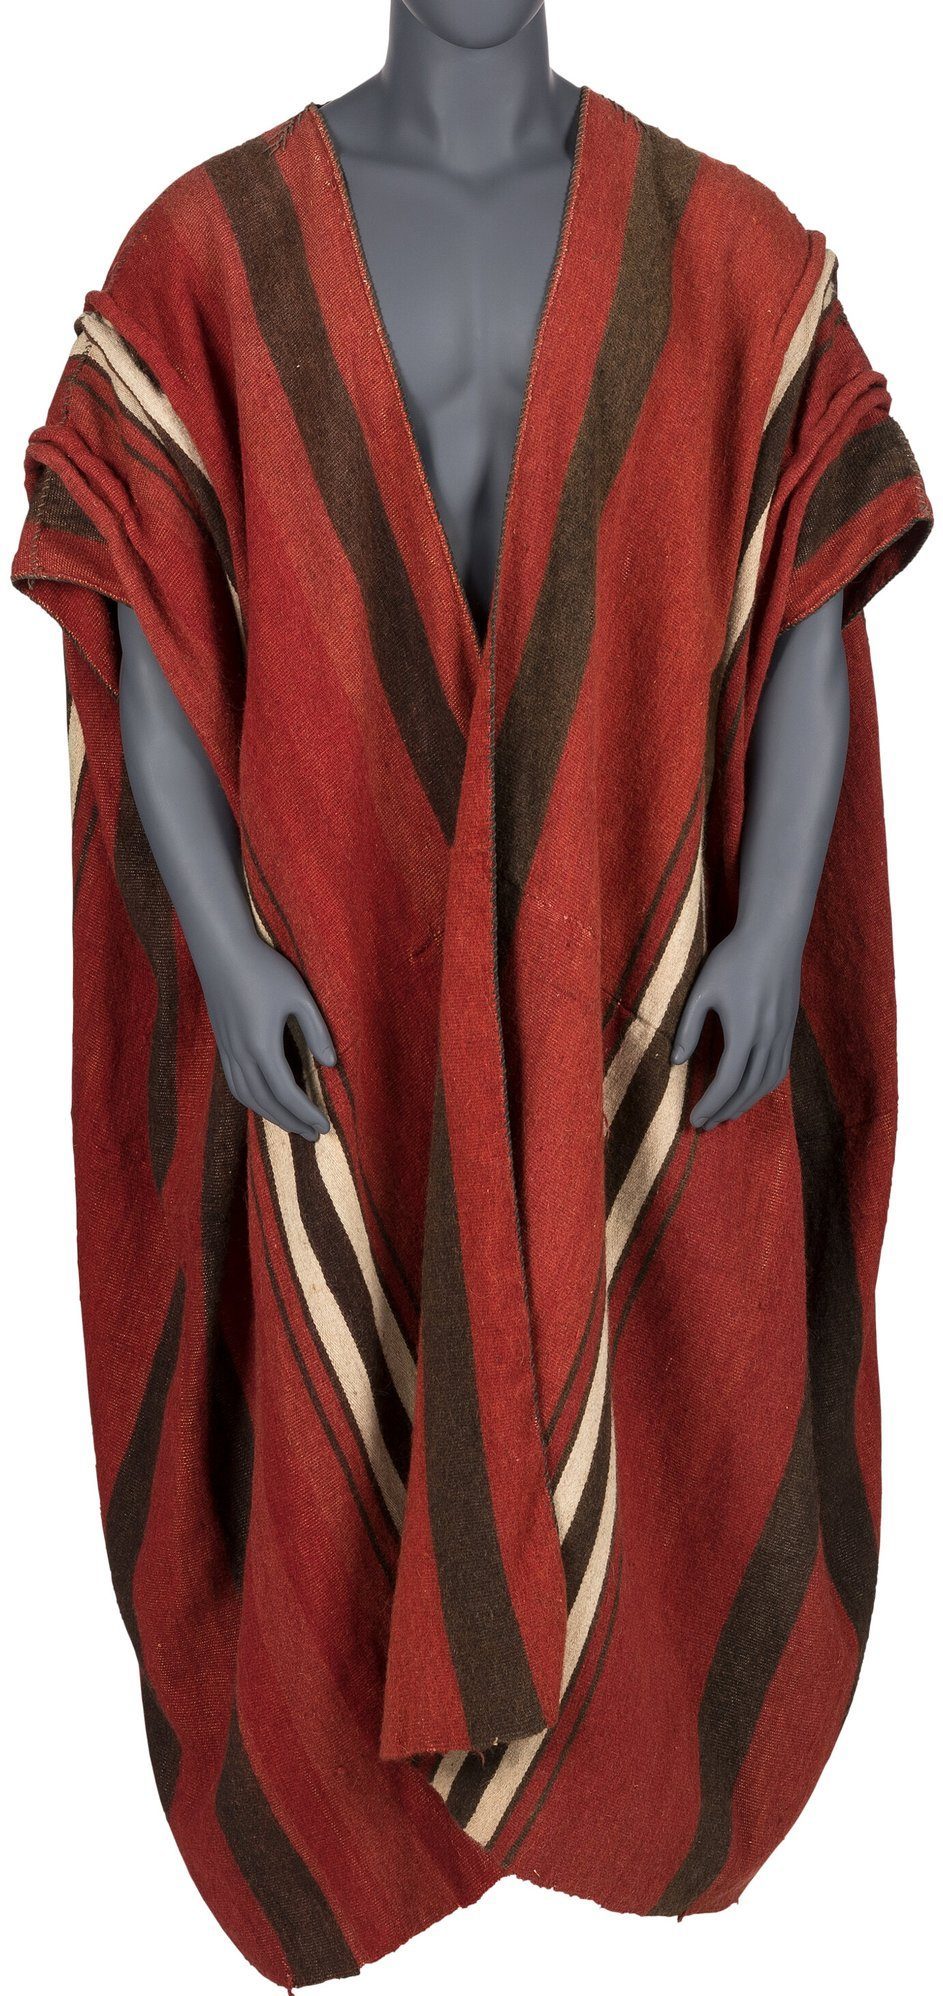 Charlton Heston's robe from his role as Moses in The Ten Commandments (1956) sold for $447,000 at Heritage Auctions. Photo courtesy of Heritage Auctions.